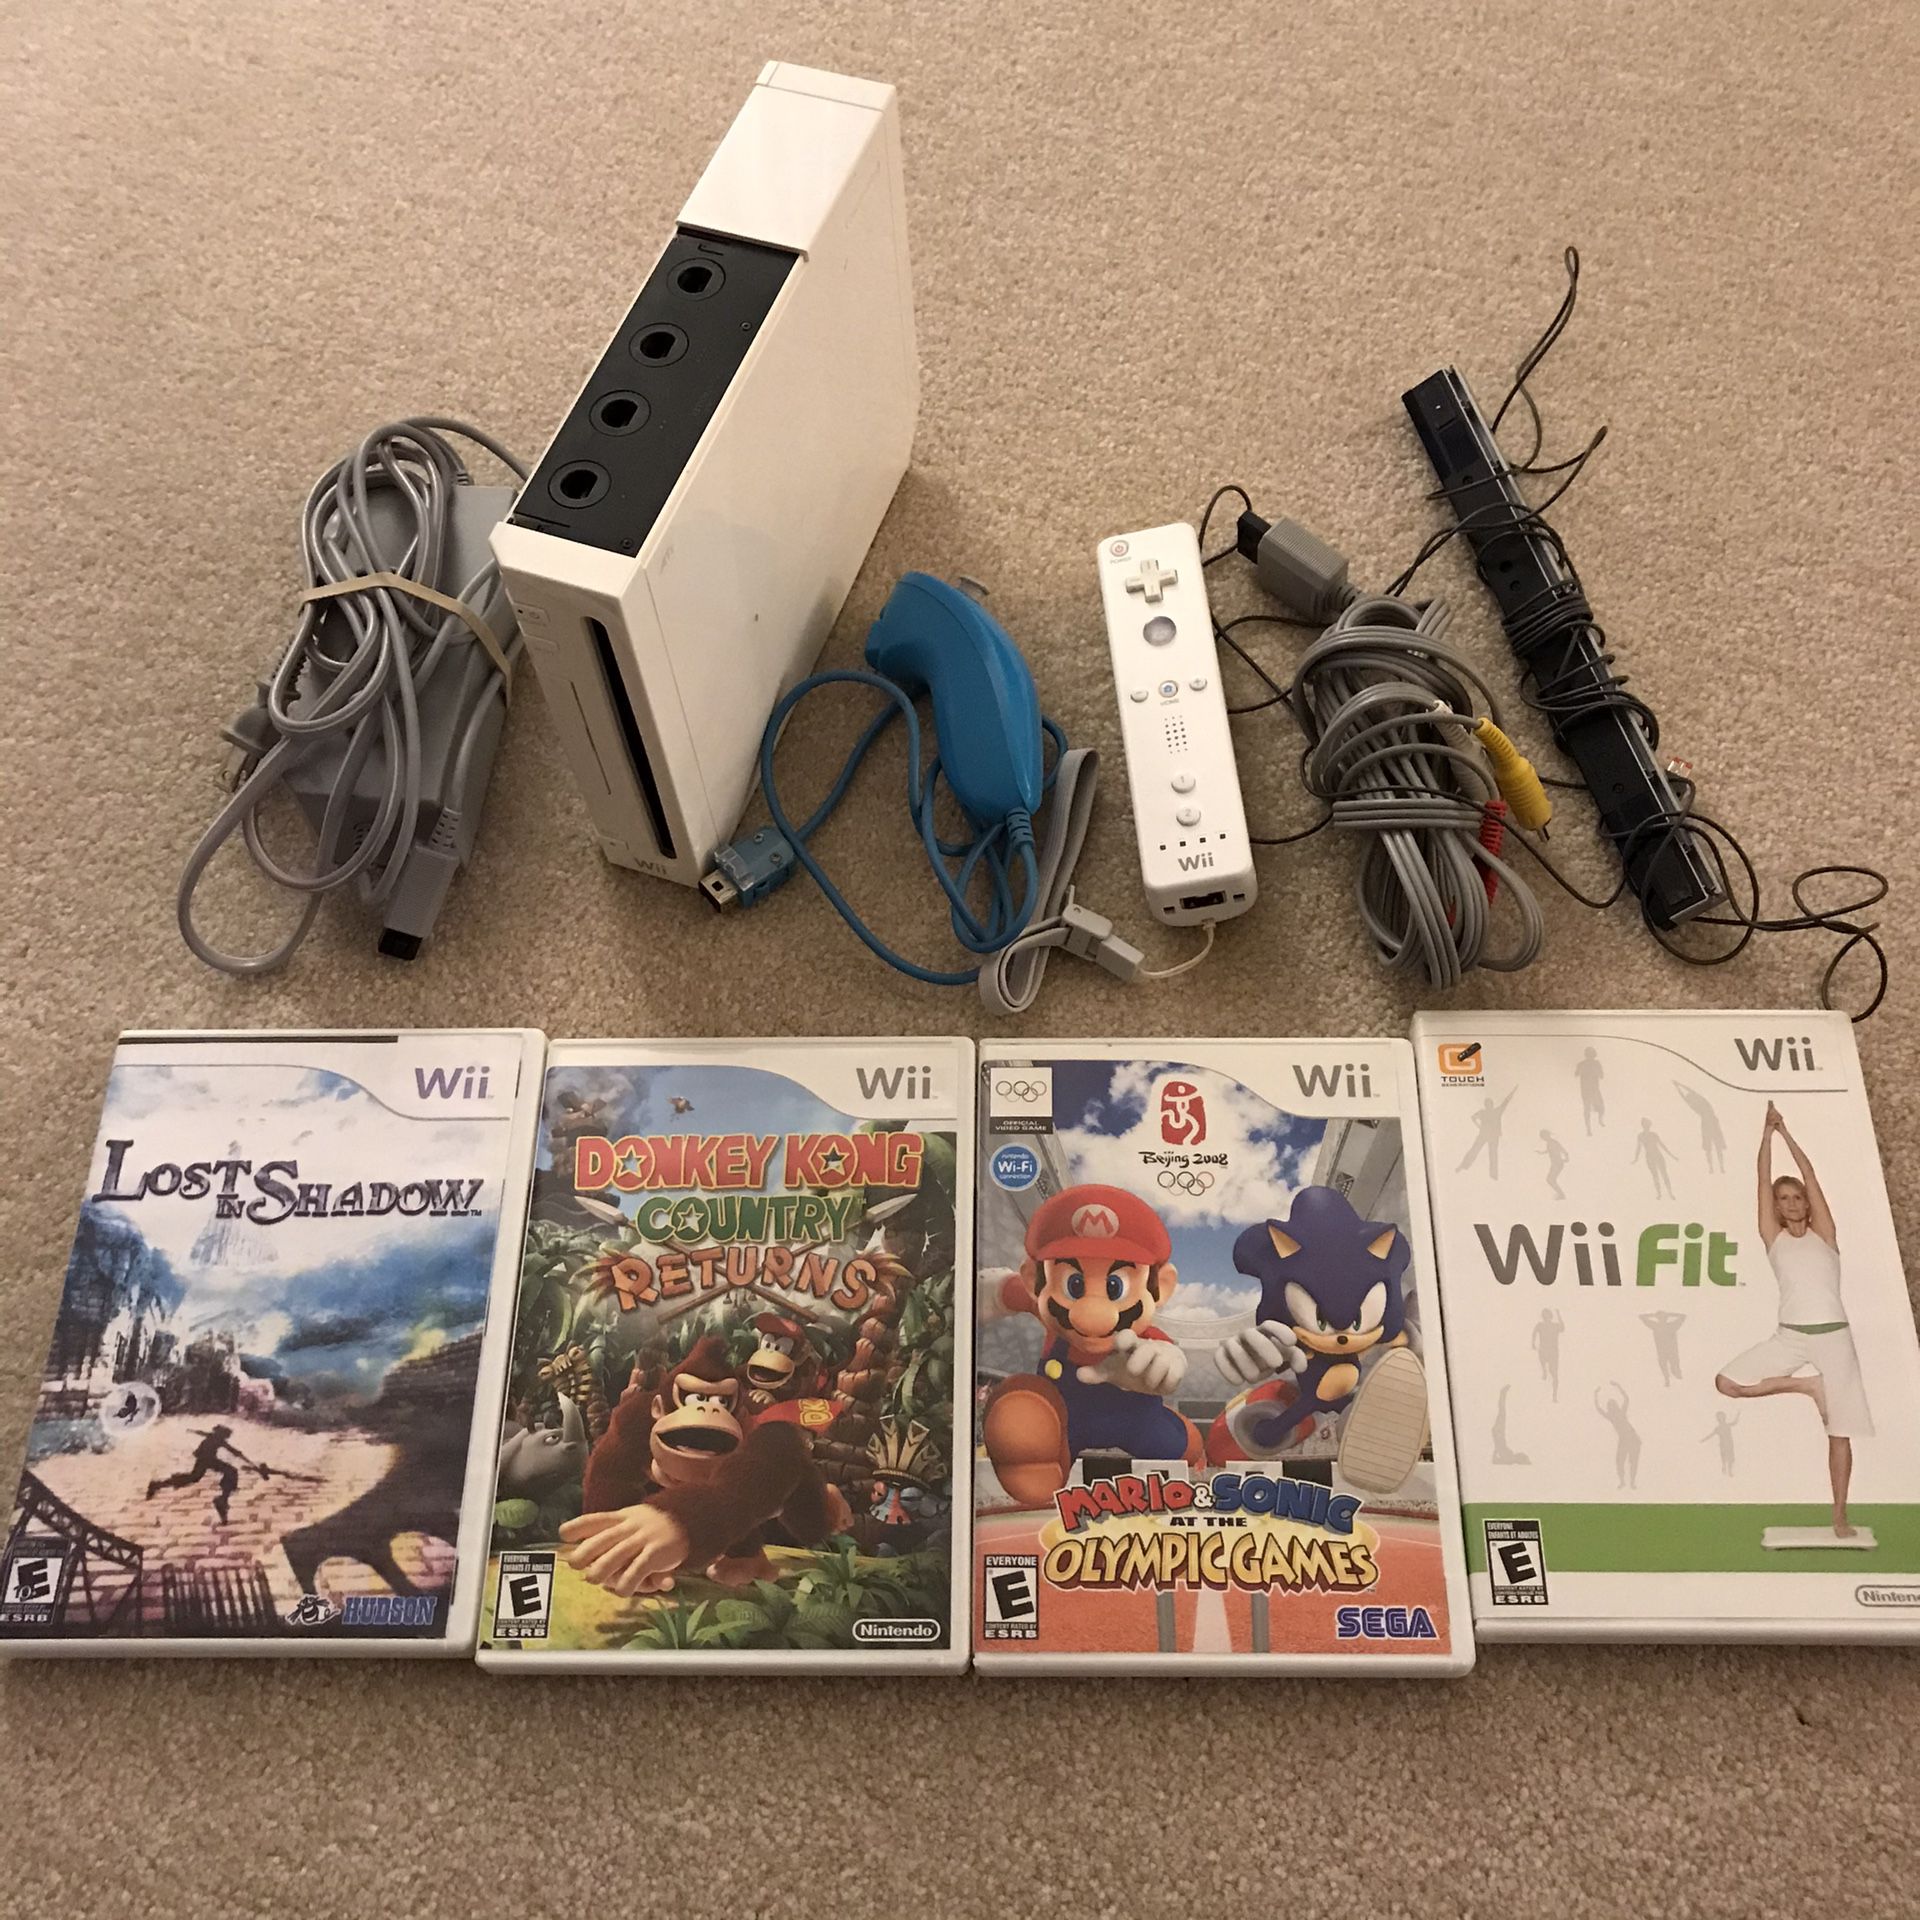 Nintendo Wii System console with 4 video games sonic mario donkey Kong wii fit controller cables